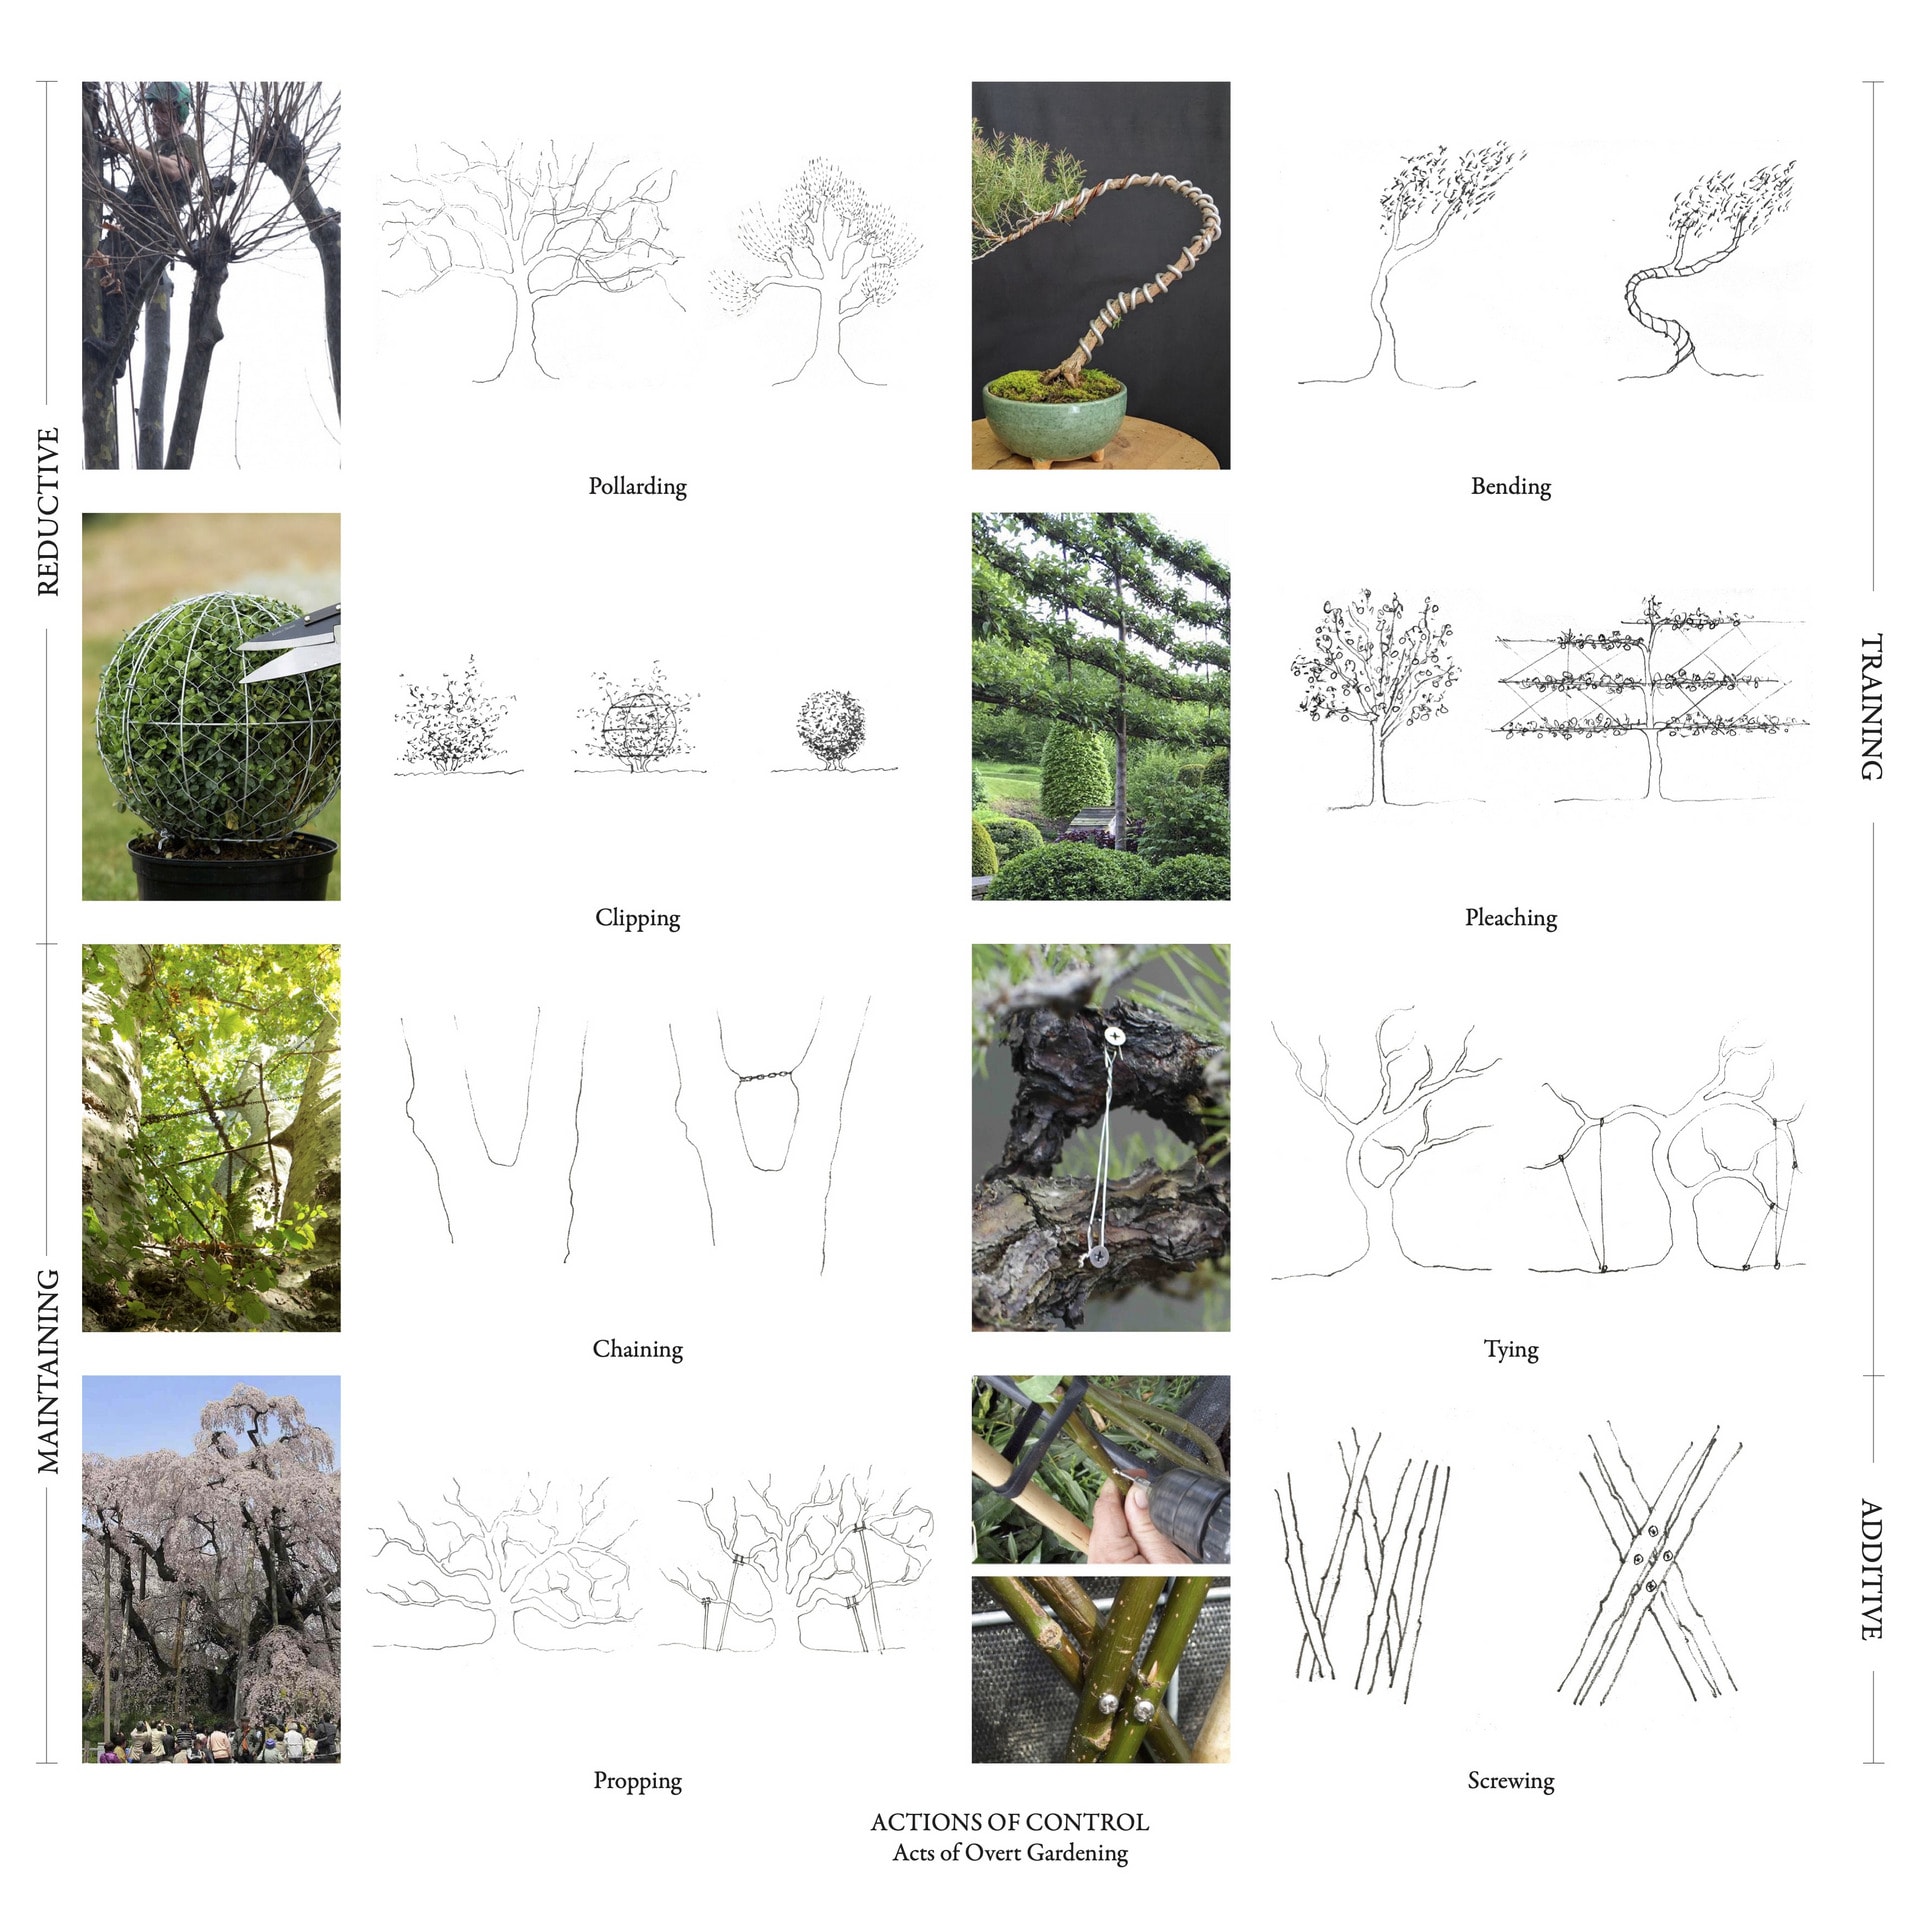 A selection of drawings and images depicting different methods of controlling plants. Reductive, Maintaining, Training, Additive